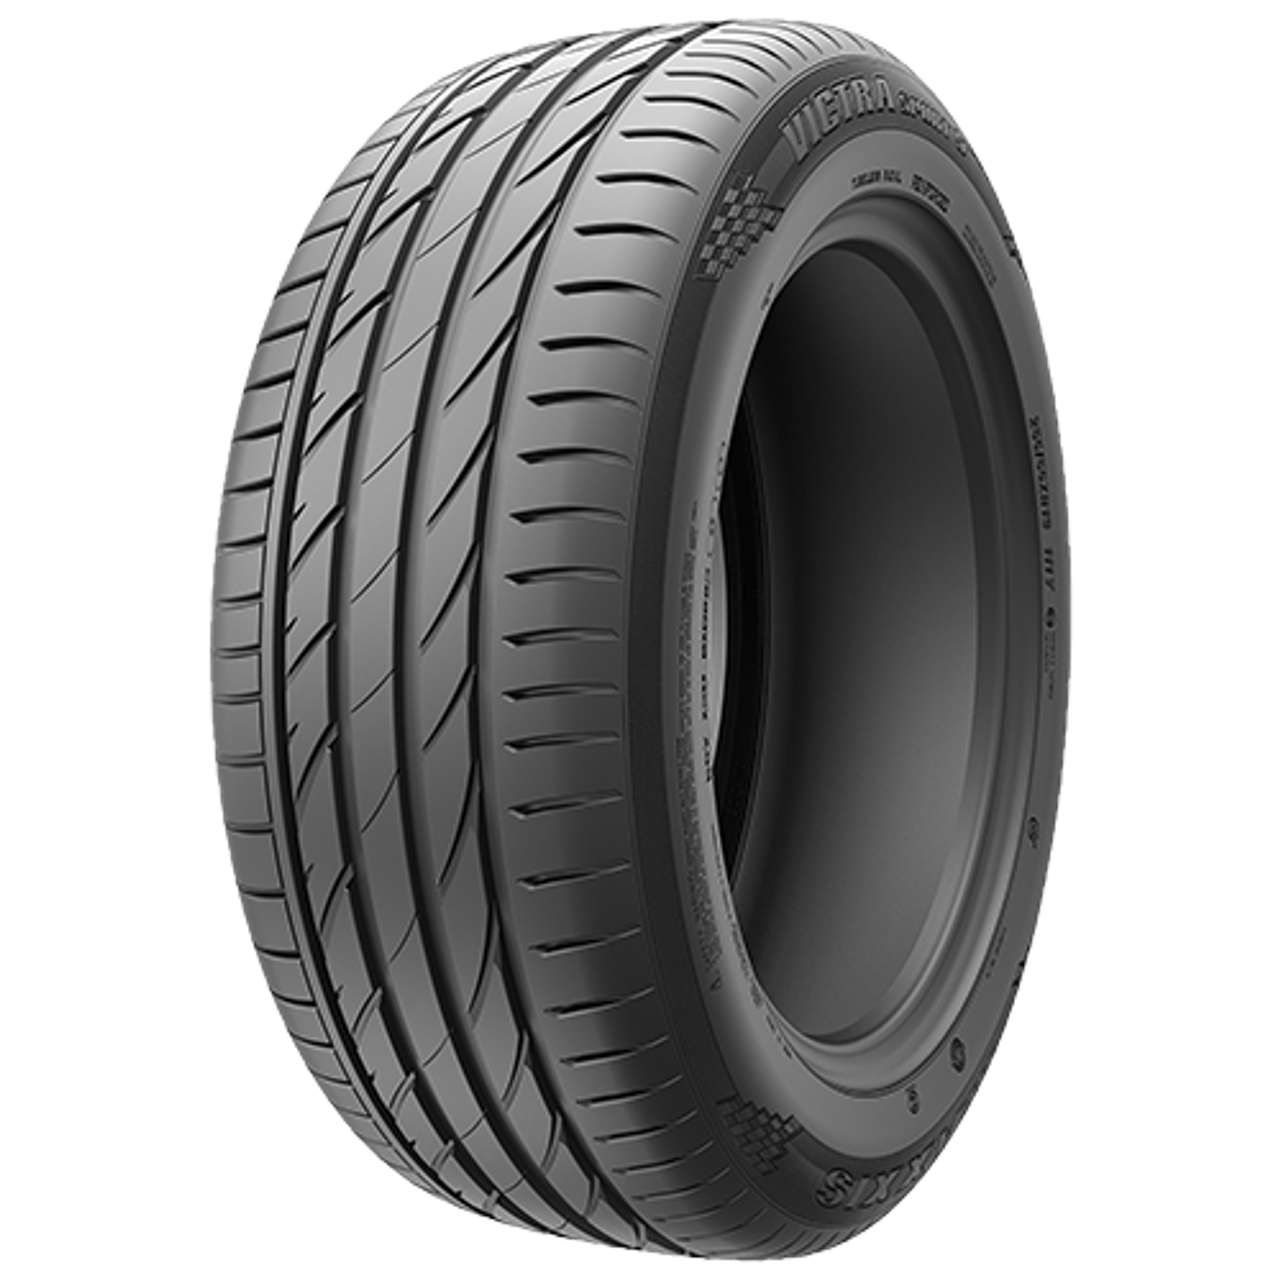 MAXXIS VICTRA SPORT 5 (VS5) SUV 235/50ZR18 97Y MFS BSW